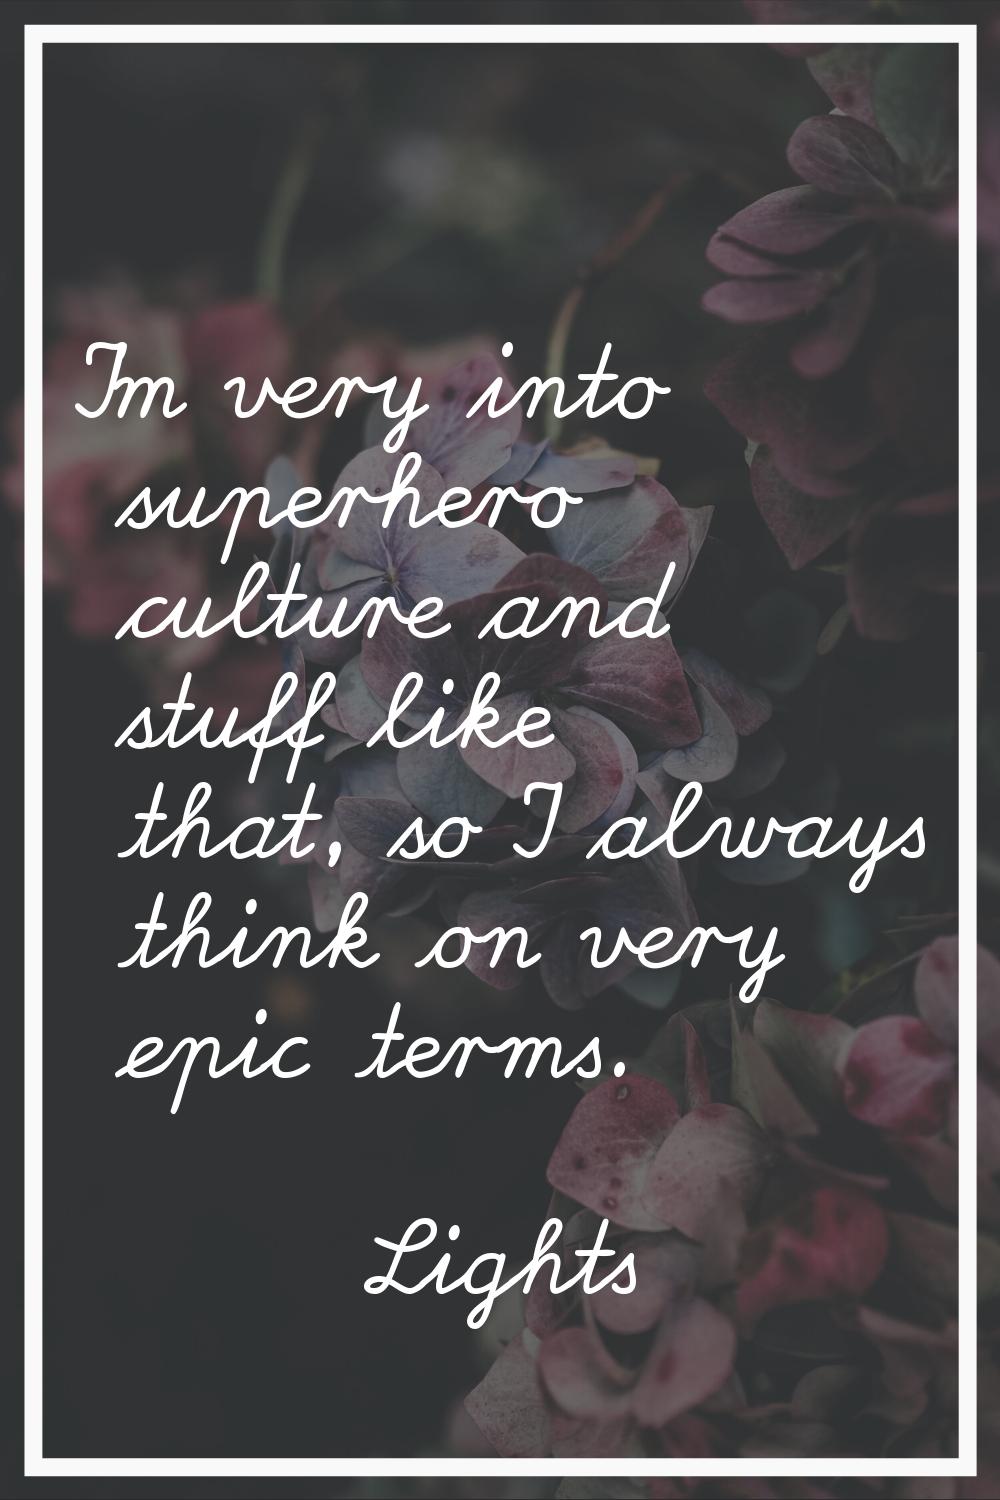 I'm very into superhero culture and stuff like that, so I always think on very epic terms.